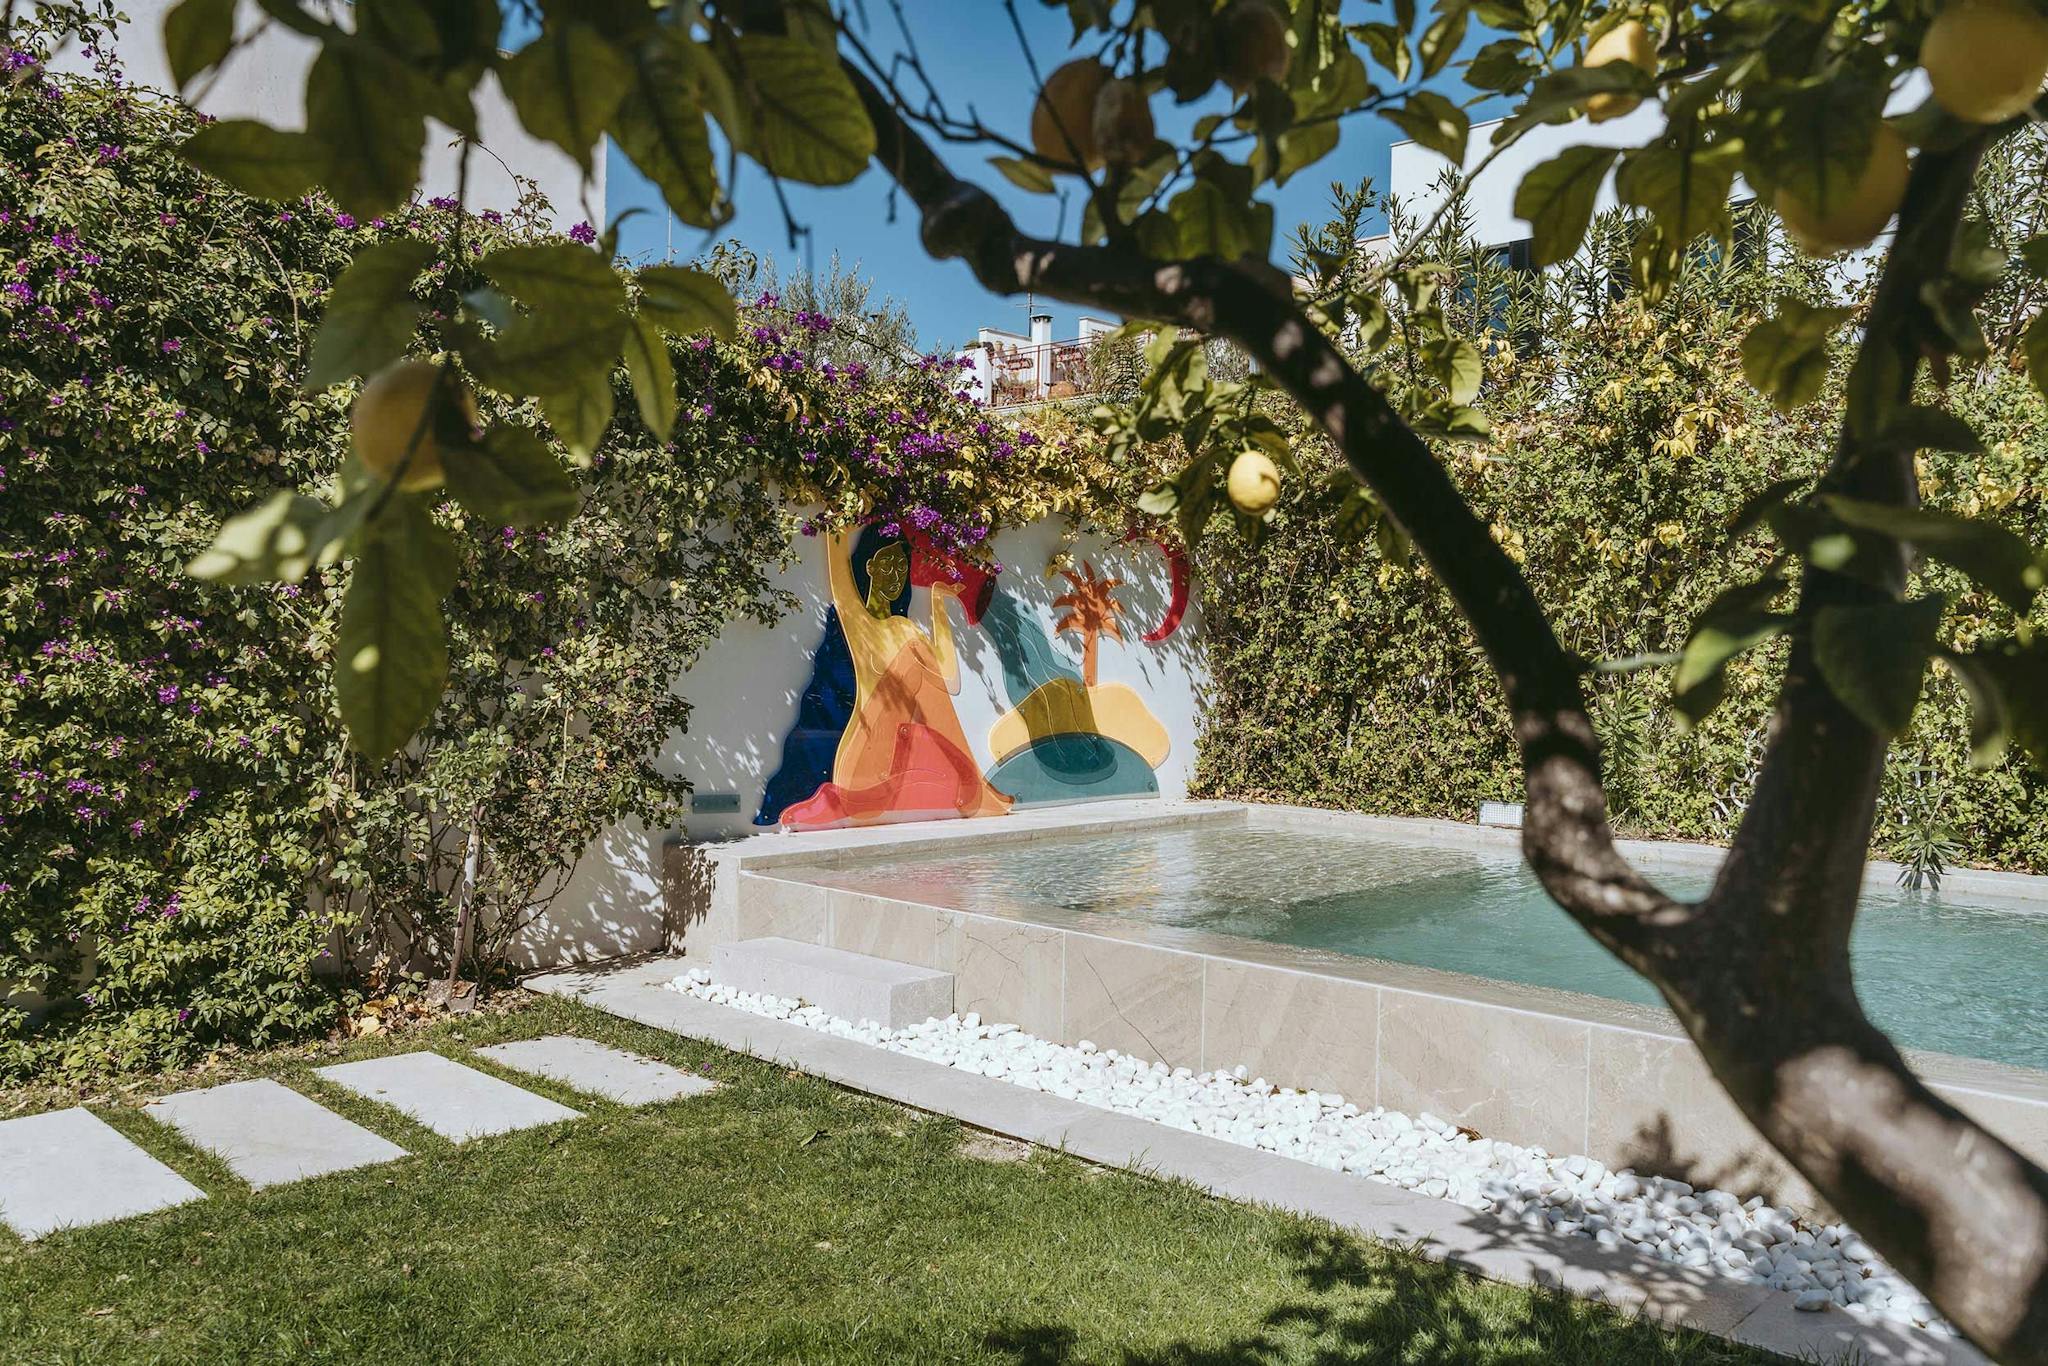 The image features a large, colorful swimming pool in a backyard, surrounded by a lush green lawn and trees. The pool is filled with water and has a colorful, rainbow-colored umbrella floating in the pool.